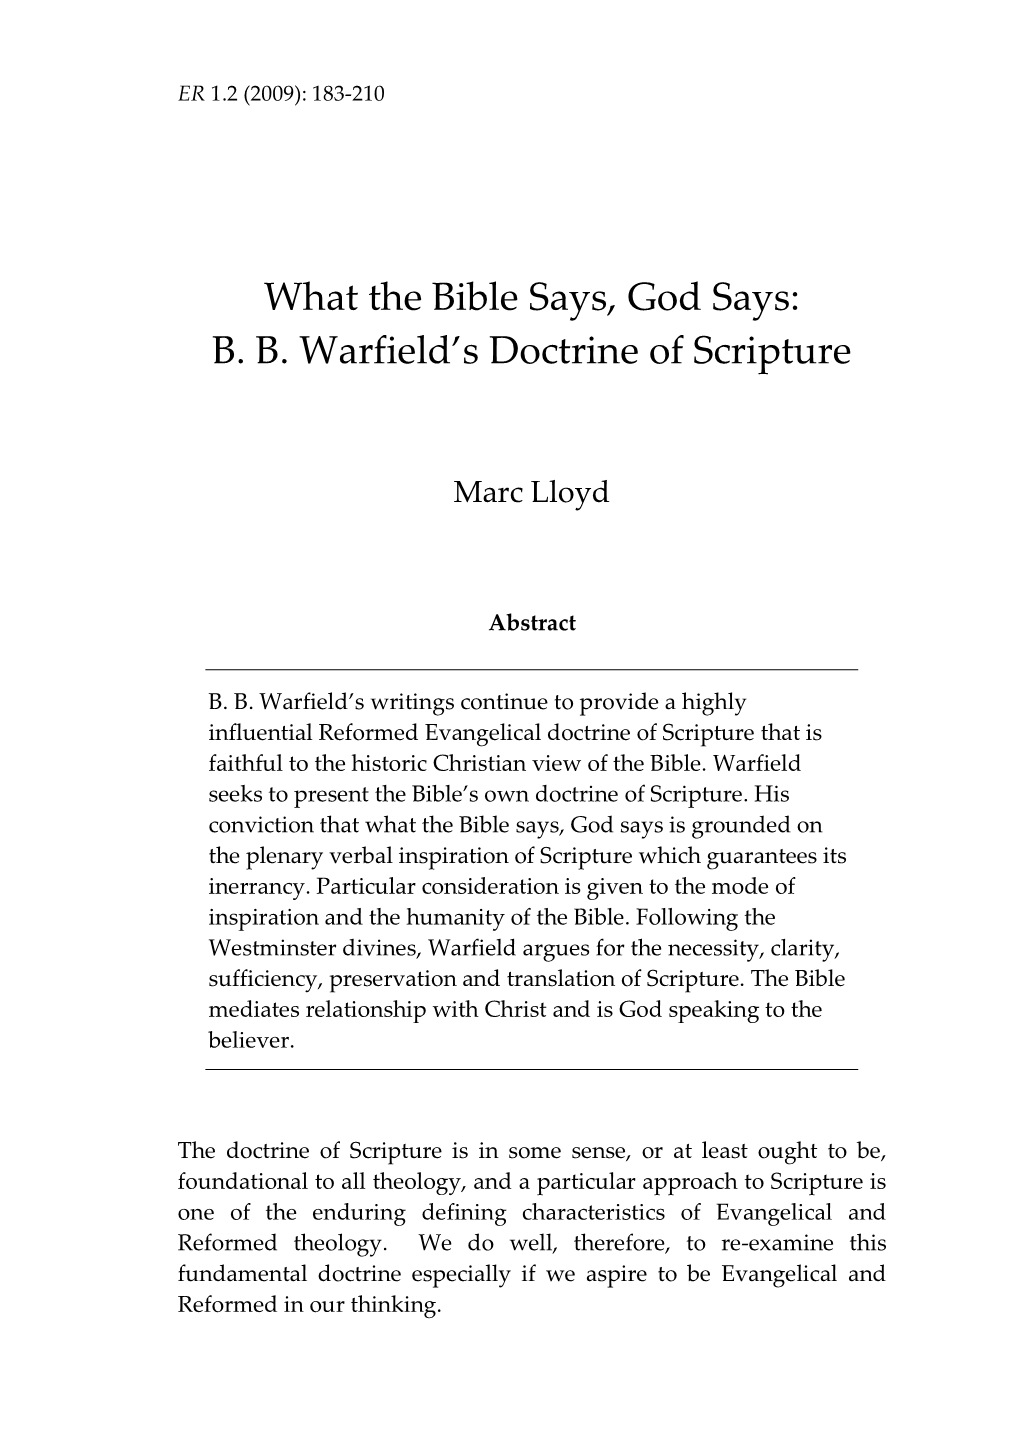 What the Bible Says, God Says: B. B. Warfield's Doctrine of Scripture